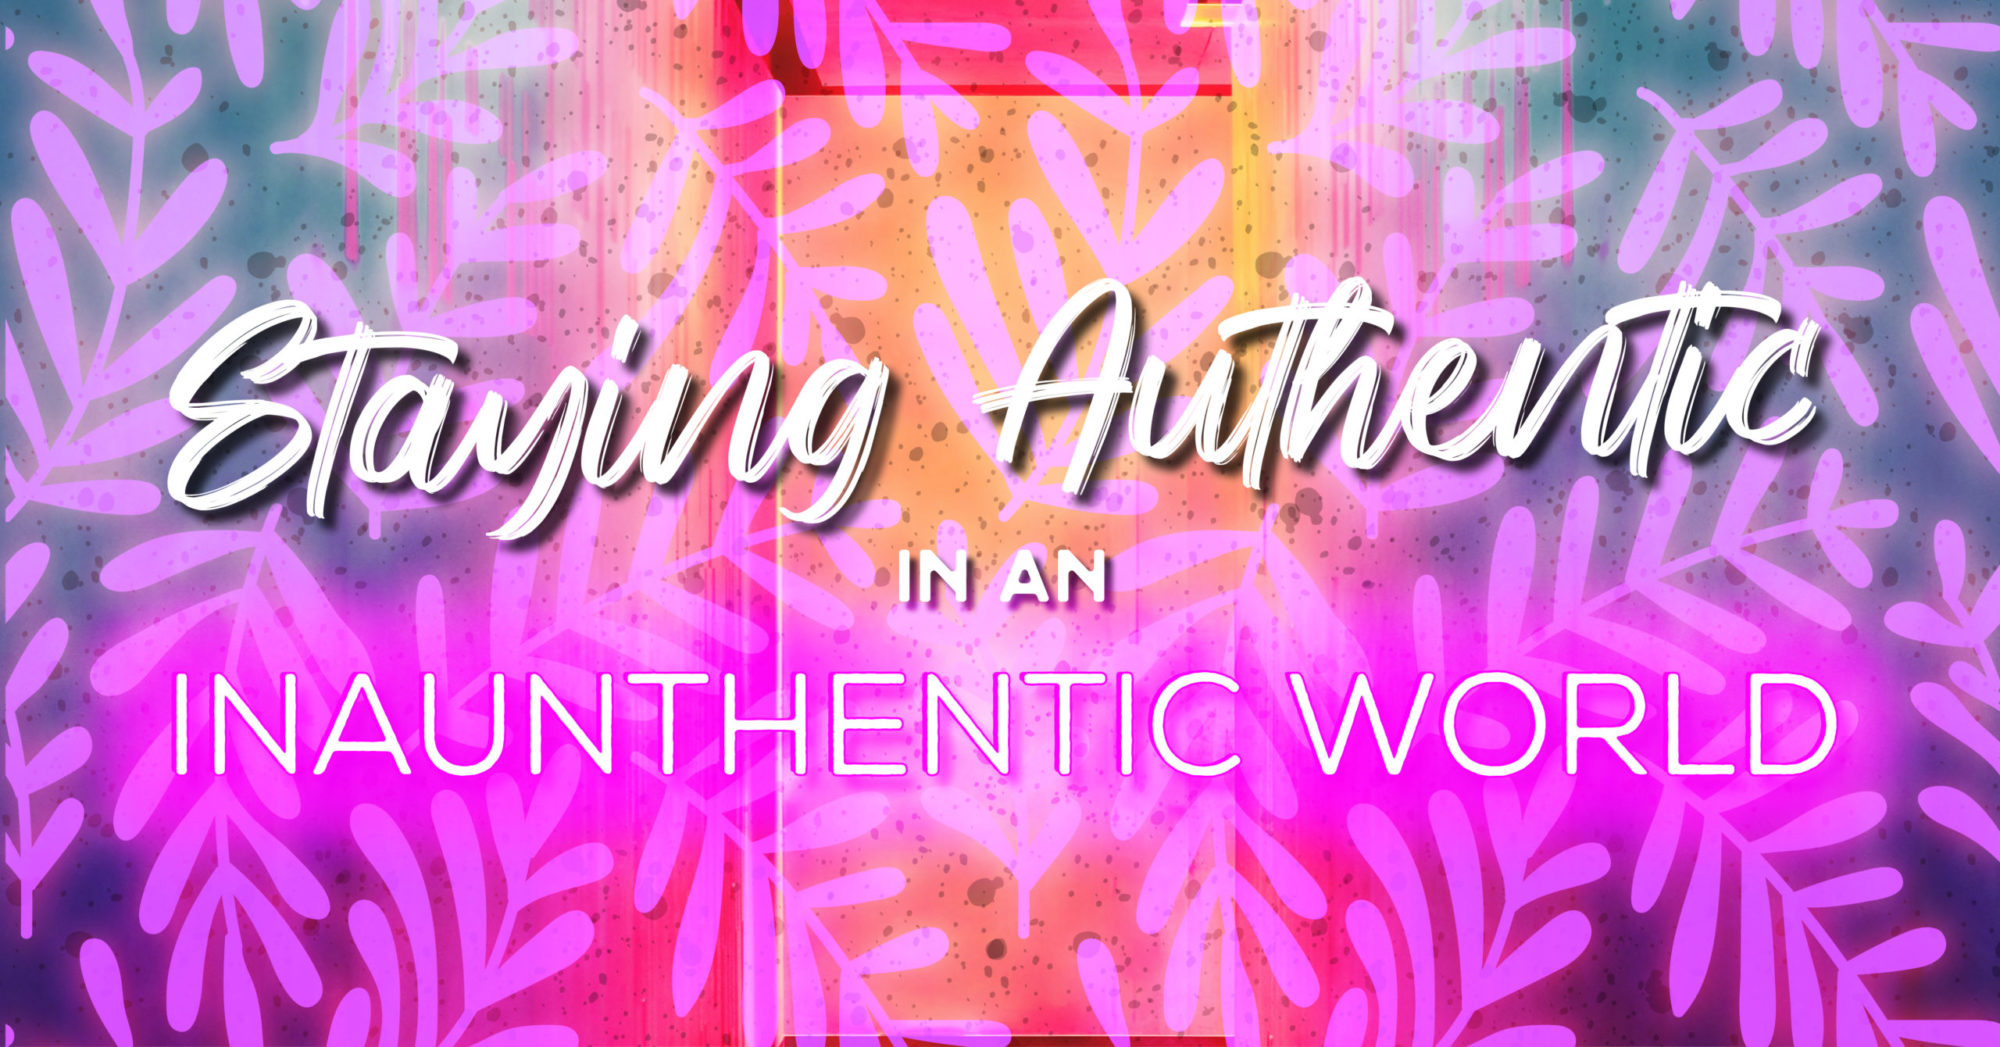 The text Staying Authentic in an inauthentic world on top of a pink and purple leaf pattern